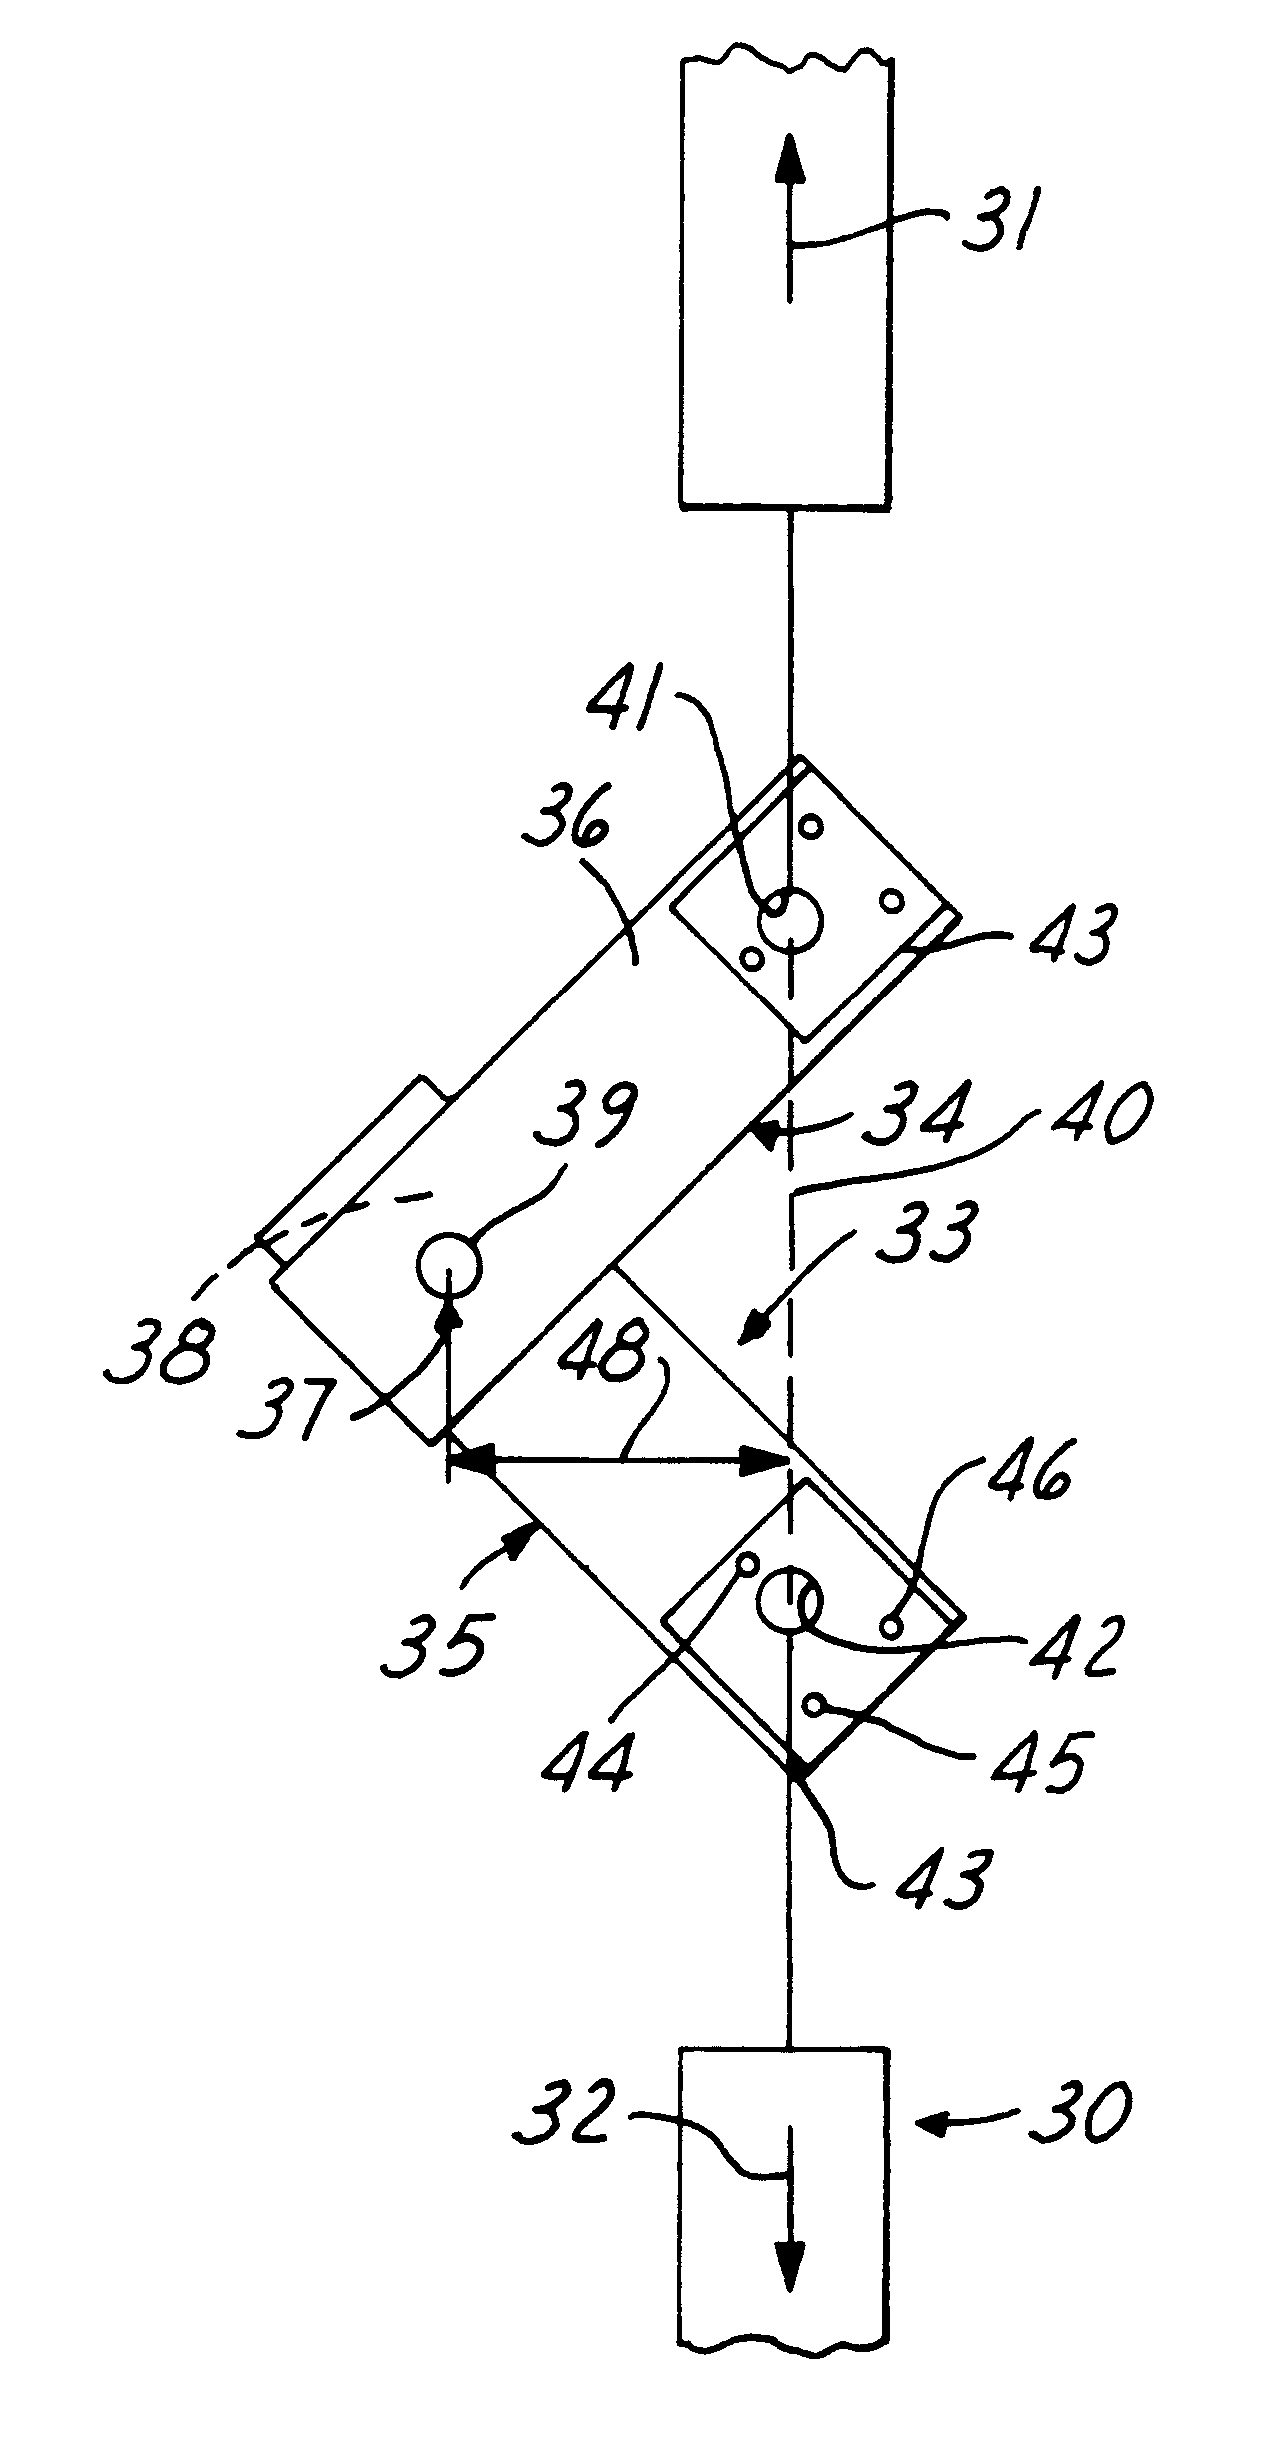 Method of analyzing spot welded structures